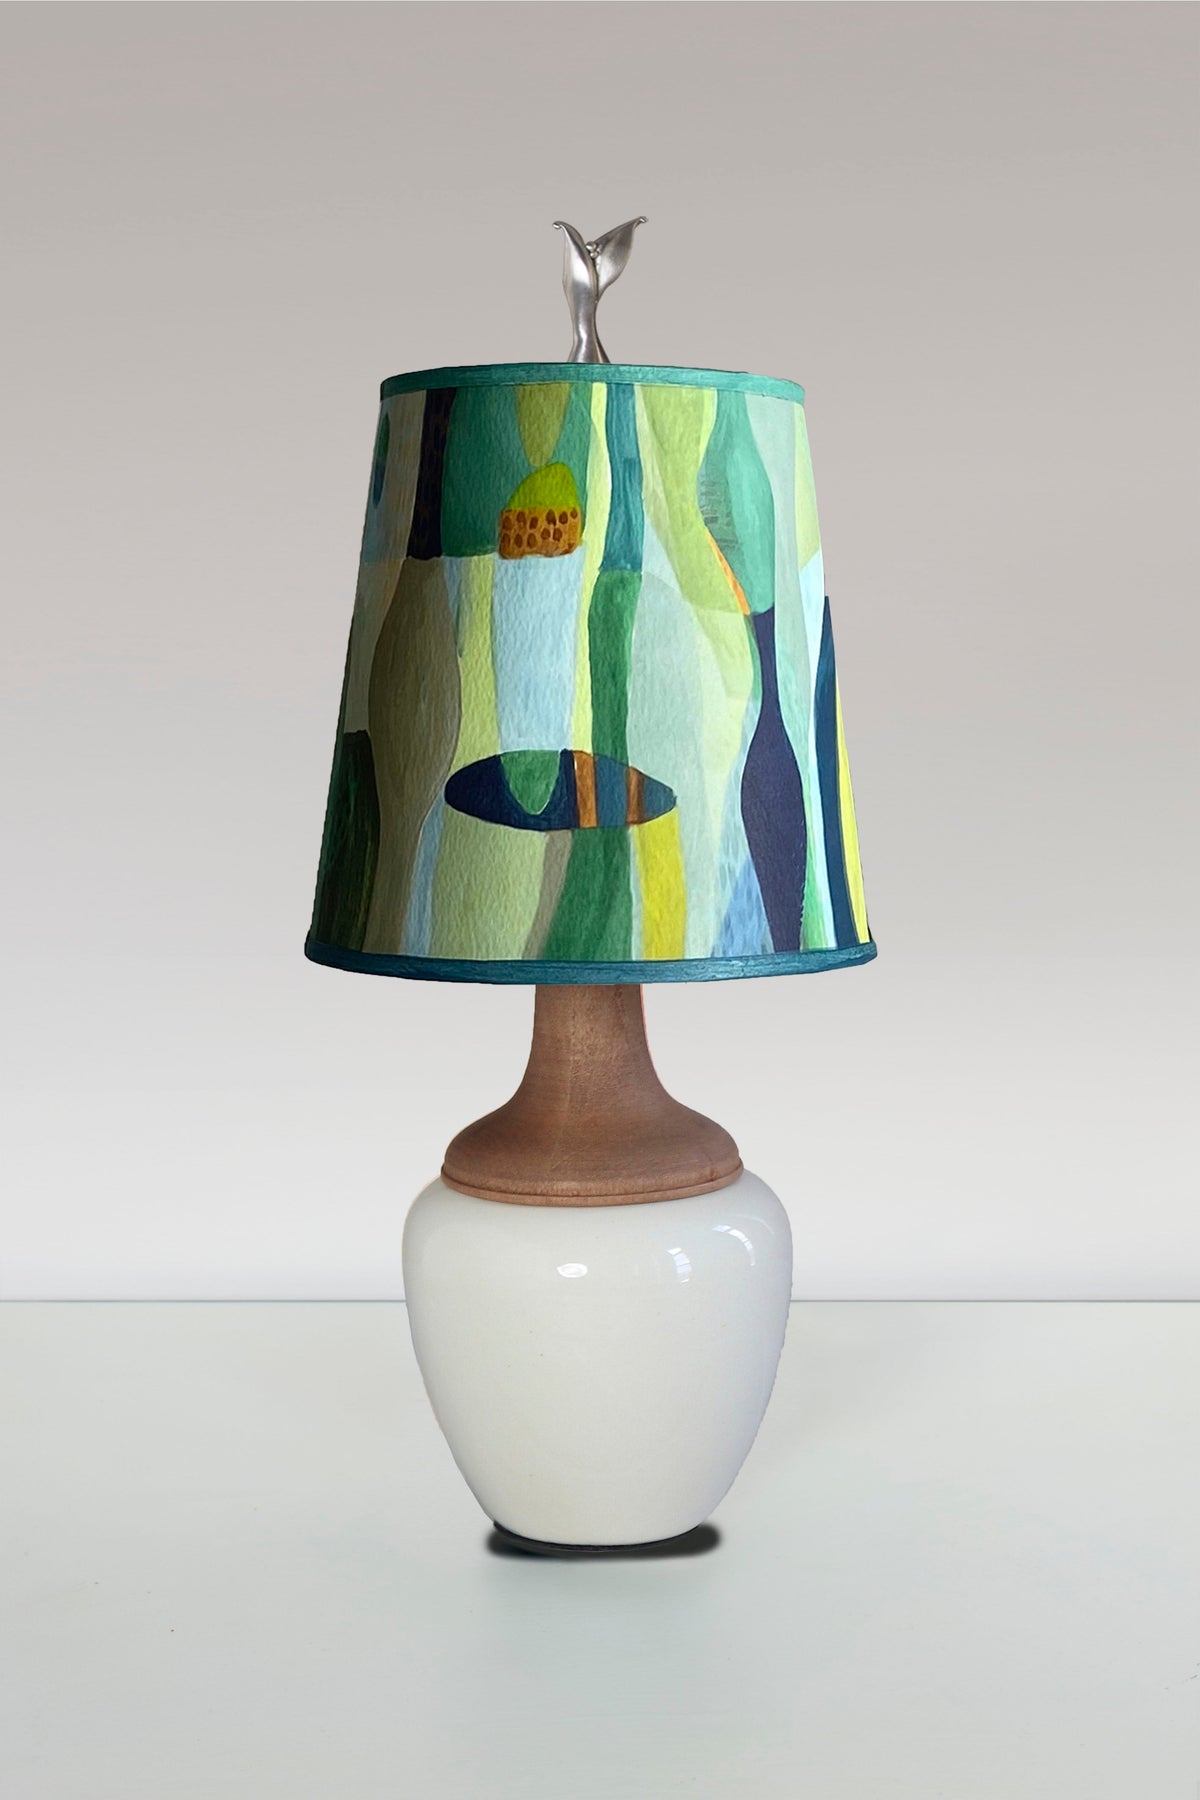 Janna Ugone &amp; Co Table Lamp Ceramic and Maple Table Lamp in Ivory Gloss with Small Drum Shade in Riviera in Citrus